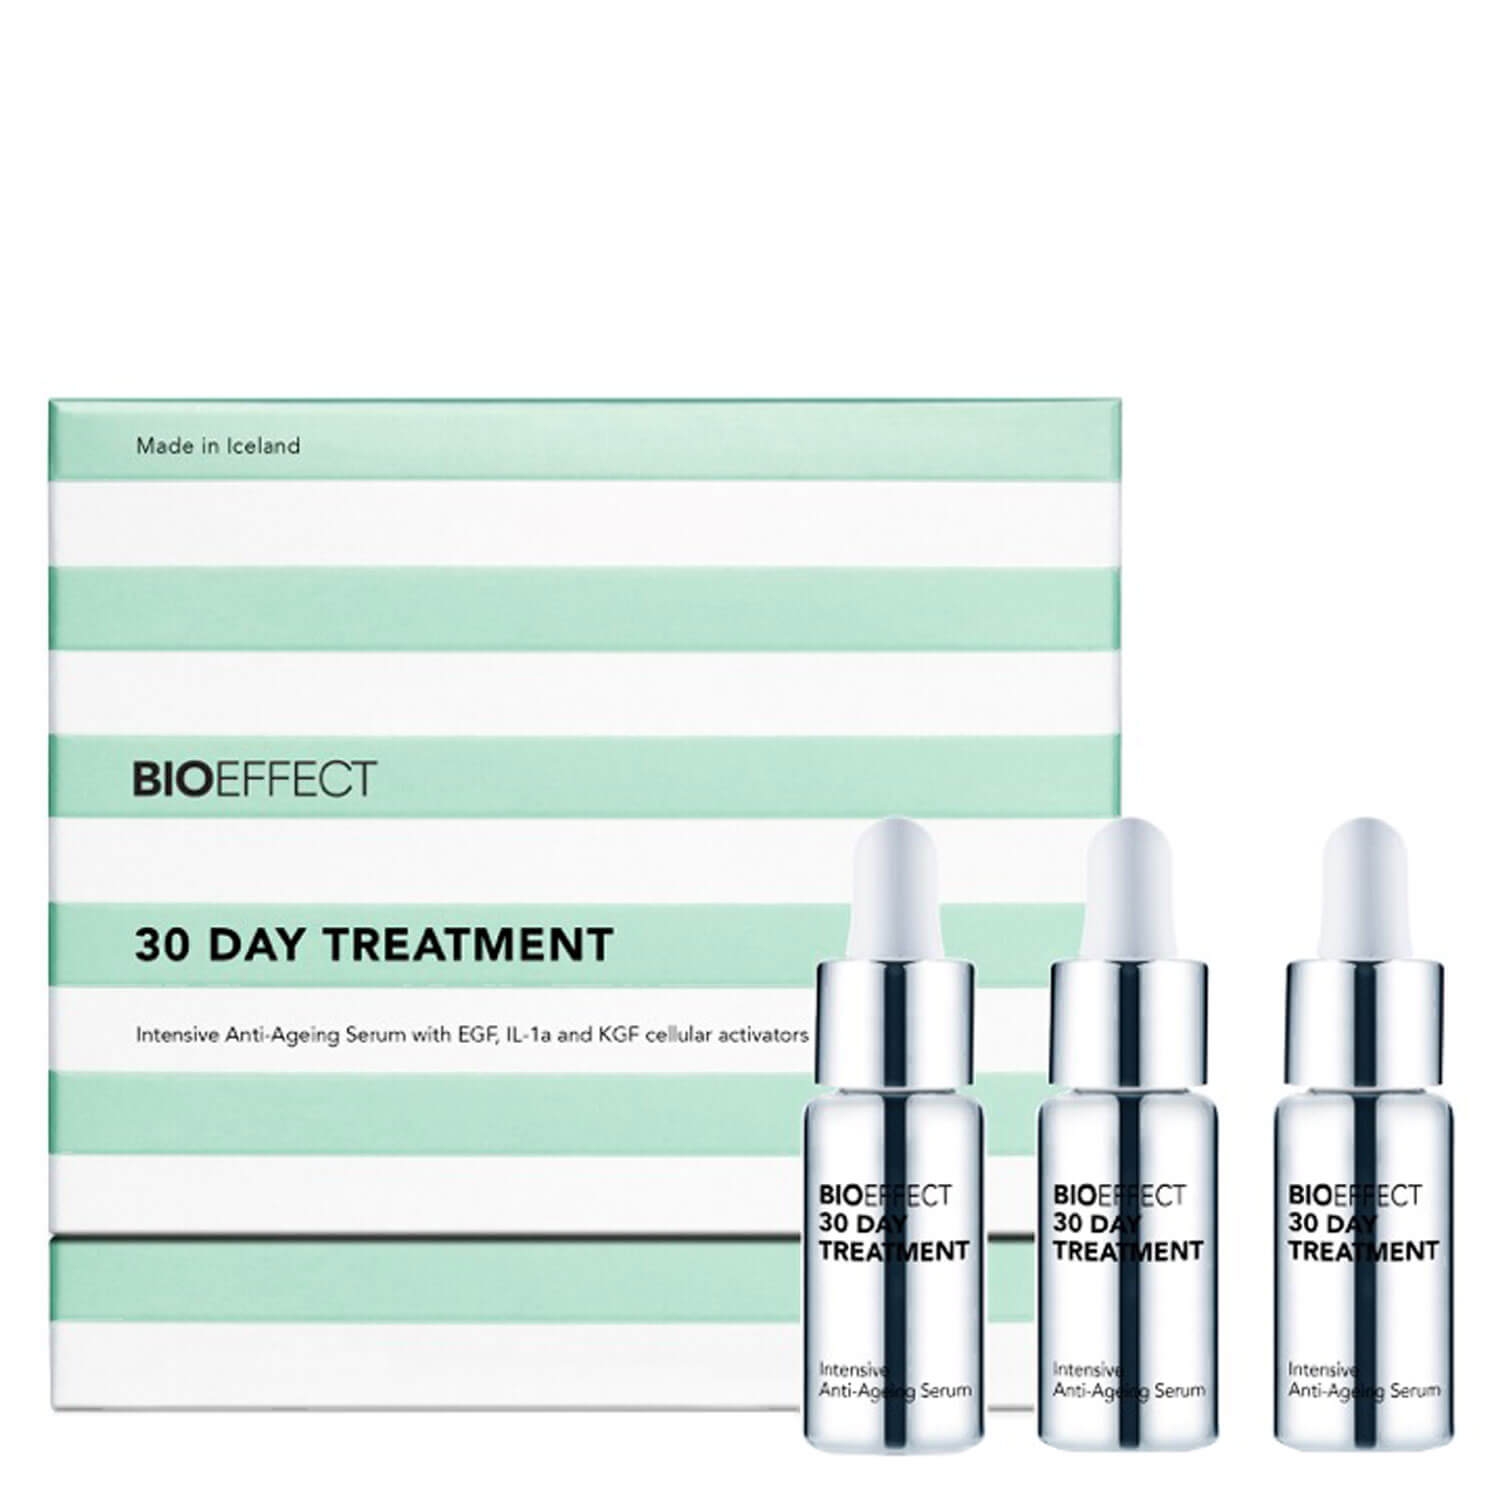 Product image from BIOEFFECT - 30 DAY TREATMENT